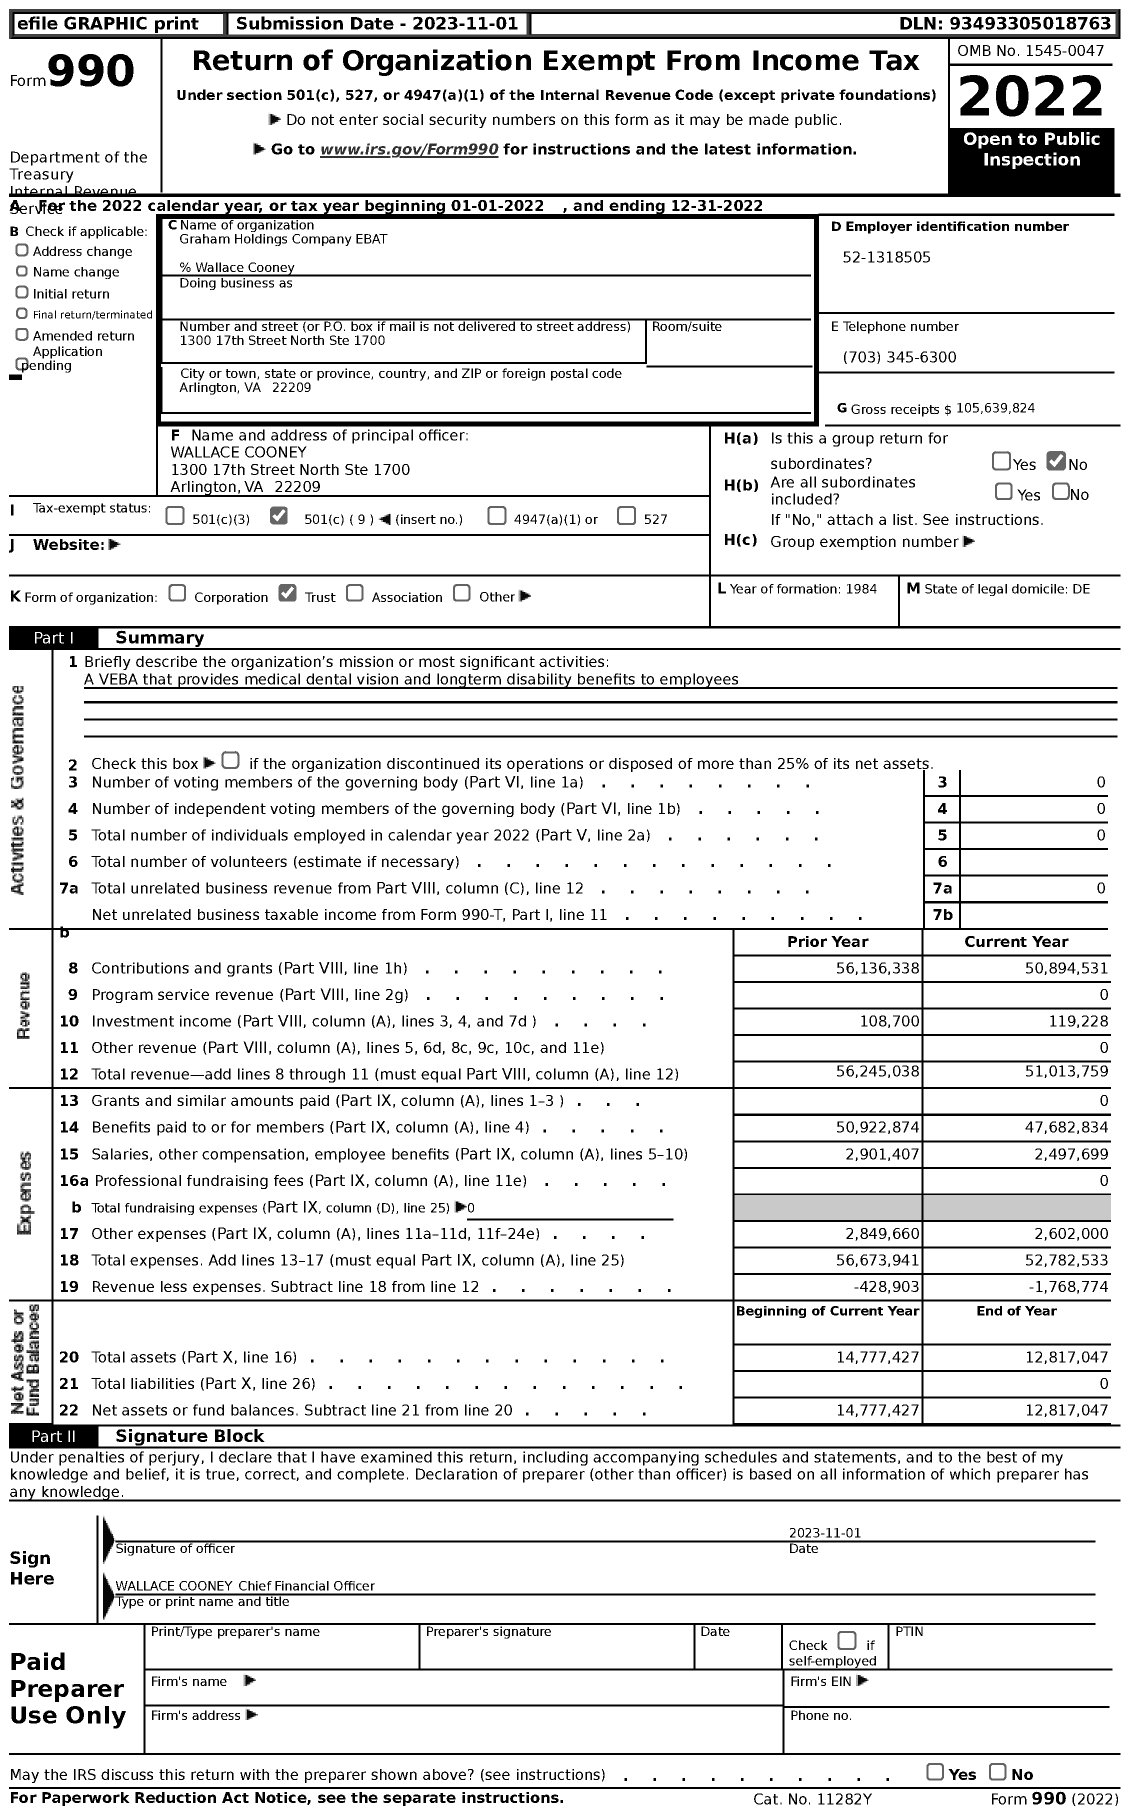 Image of first page of 2022 Form 990 for Graham Holdings Company EBAT